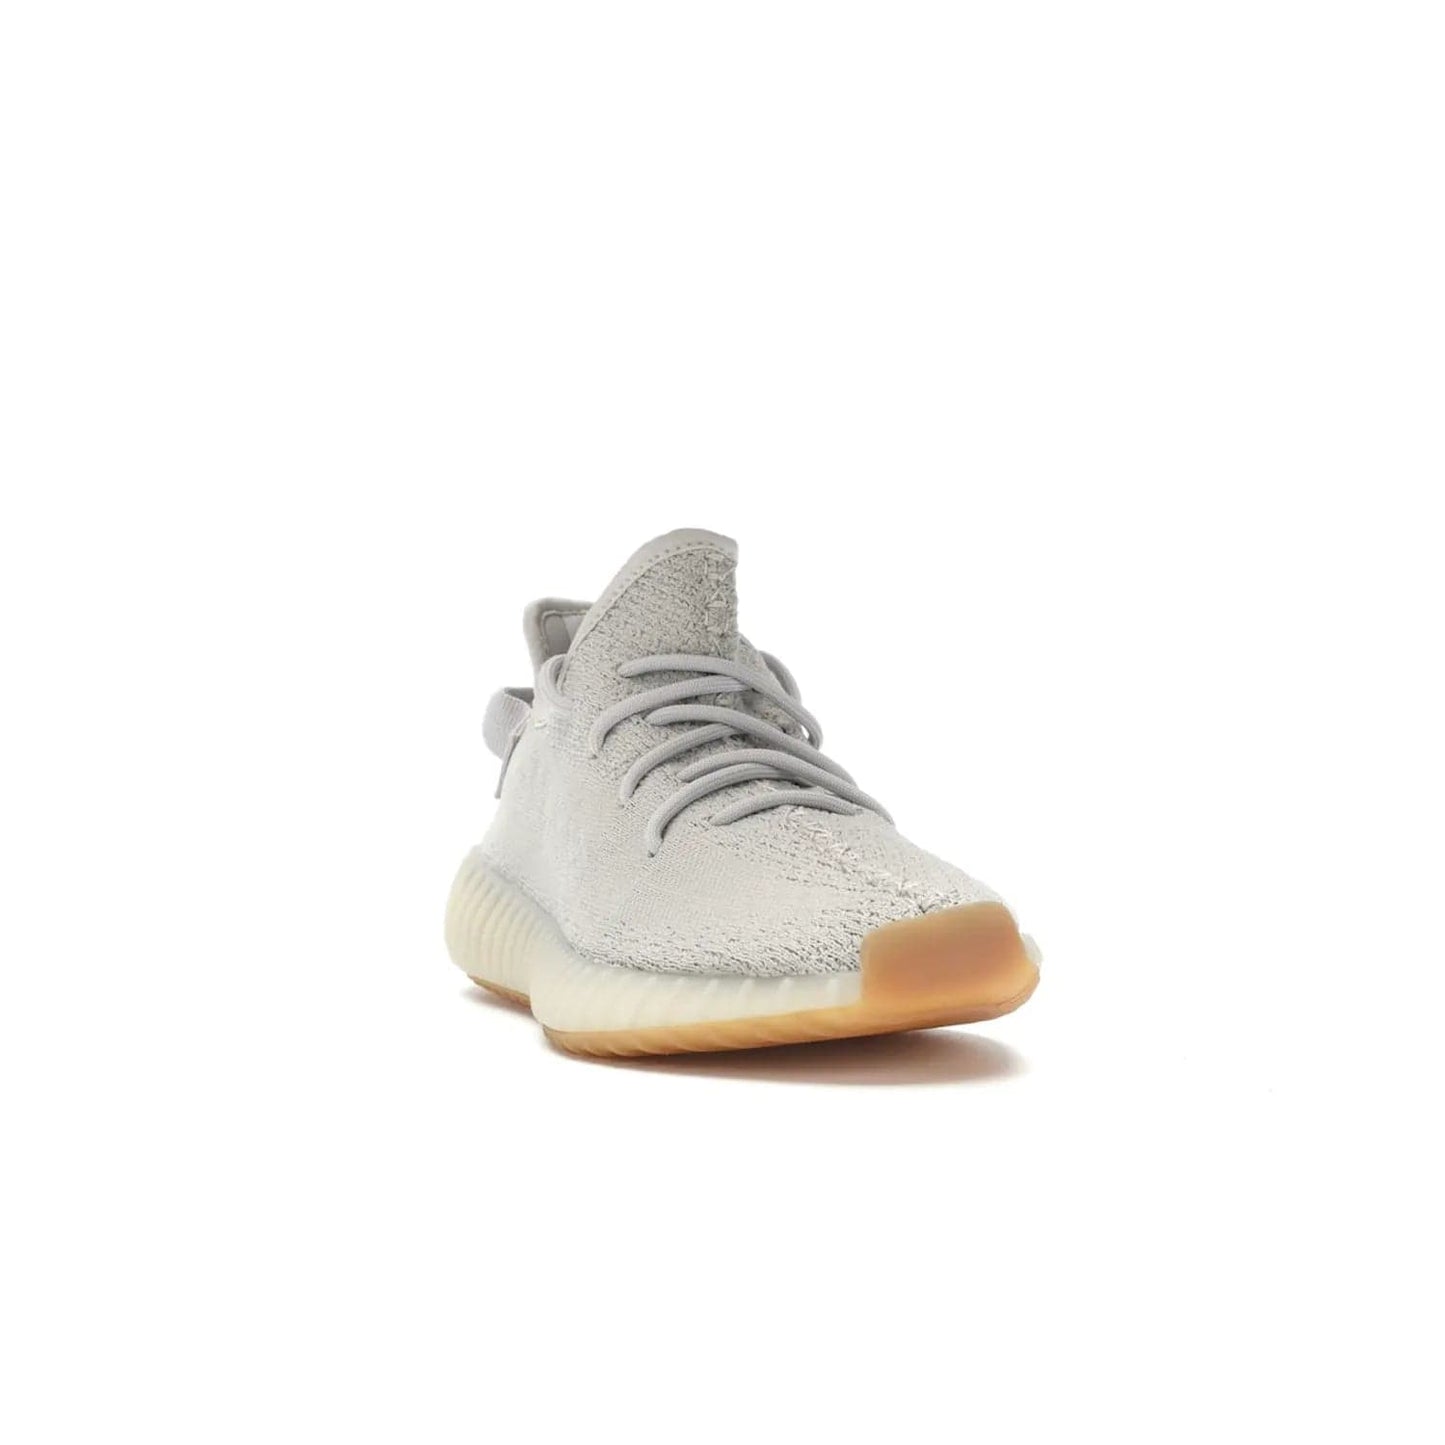 adidas Yeezy Boost 350 V2 Sesame - Image 8 - Only at www.BallersClubKickz.com - Introducing the adidas Yeezy Boost 350 V2 Sesame. Featuring a sesame upper, midsole and gum sole for a sleek silhouette. Cop the stylish sneaker released in November 2018.